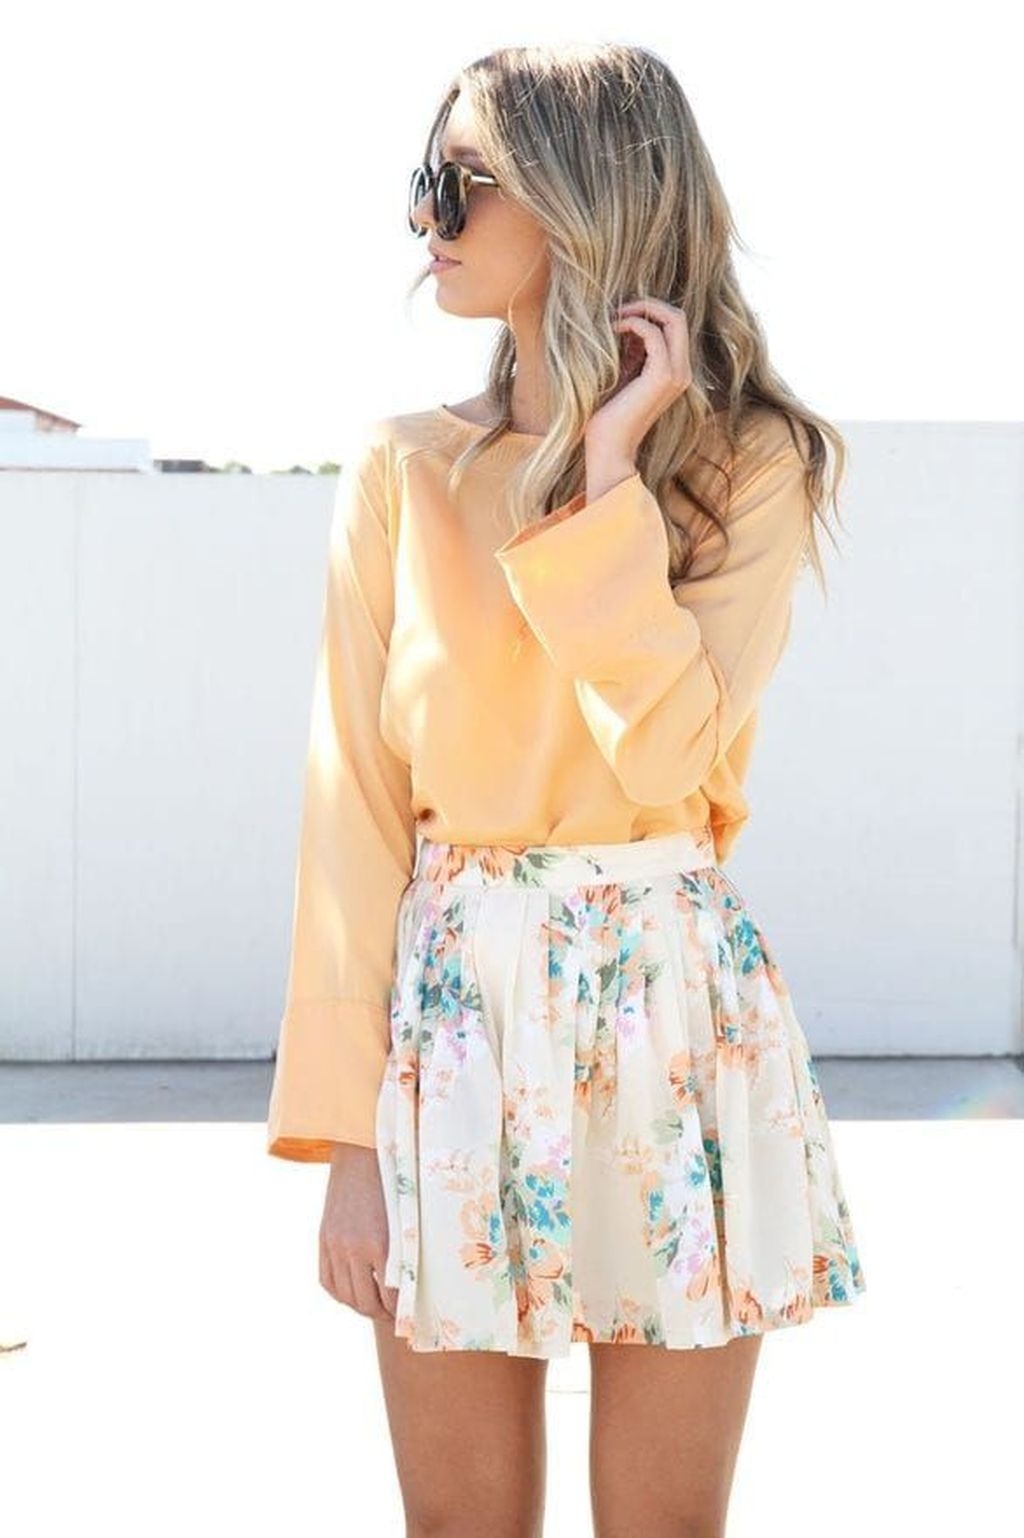 47 Excellent Spring Fashion Outfits Ideas For Teen Girls